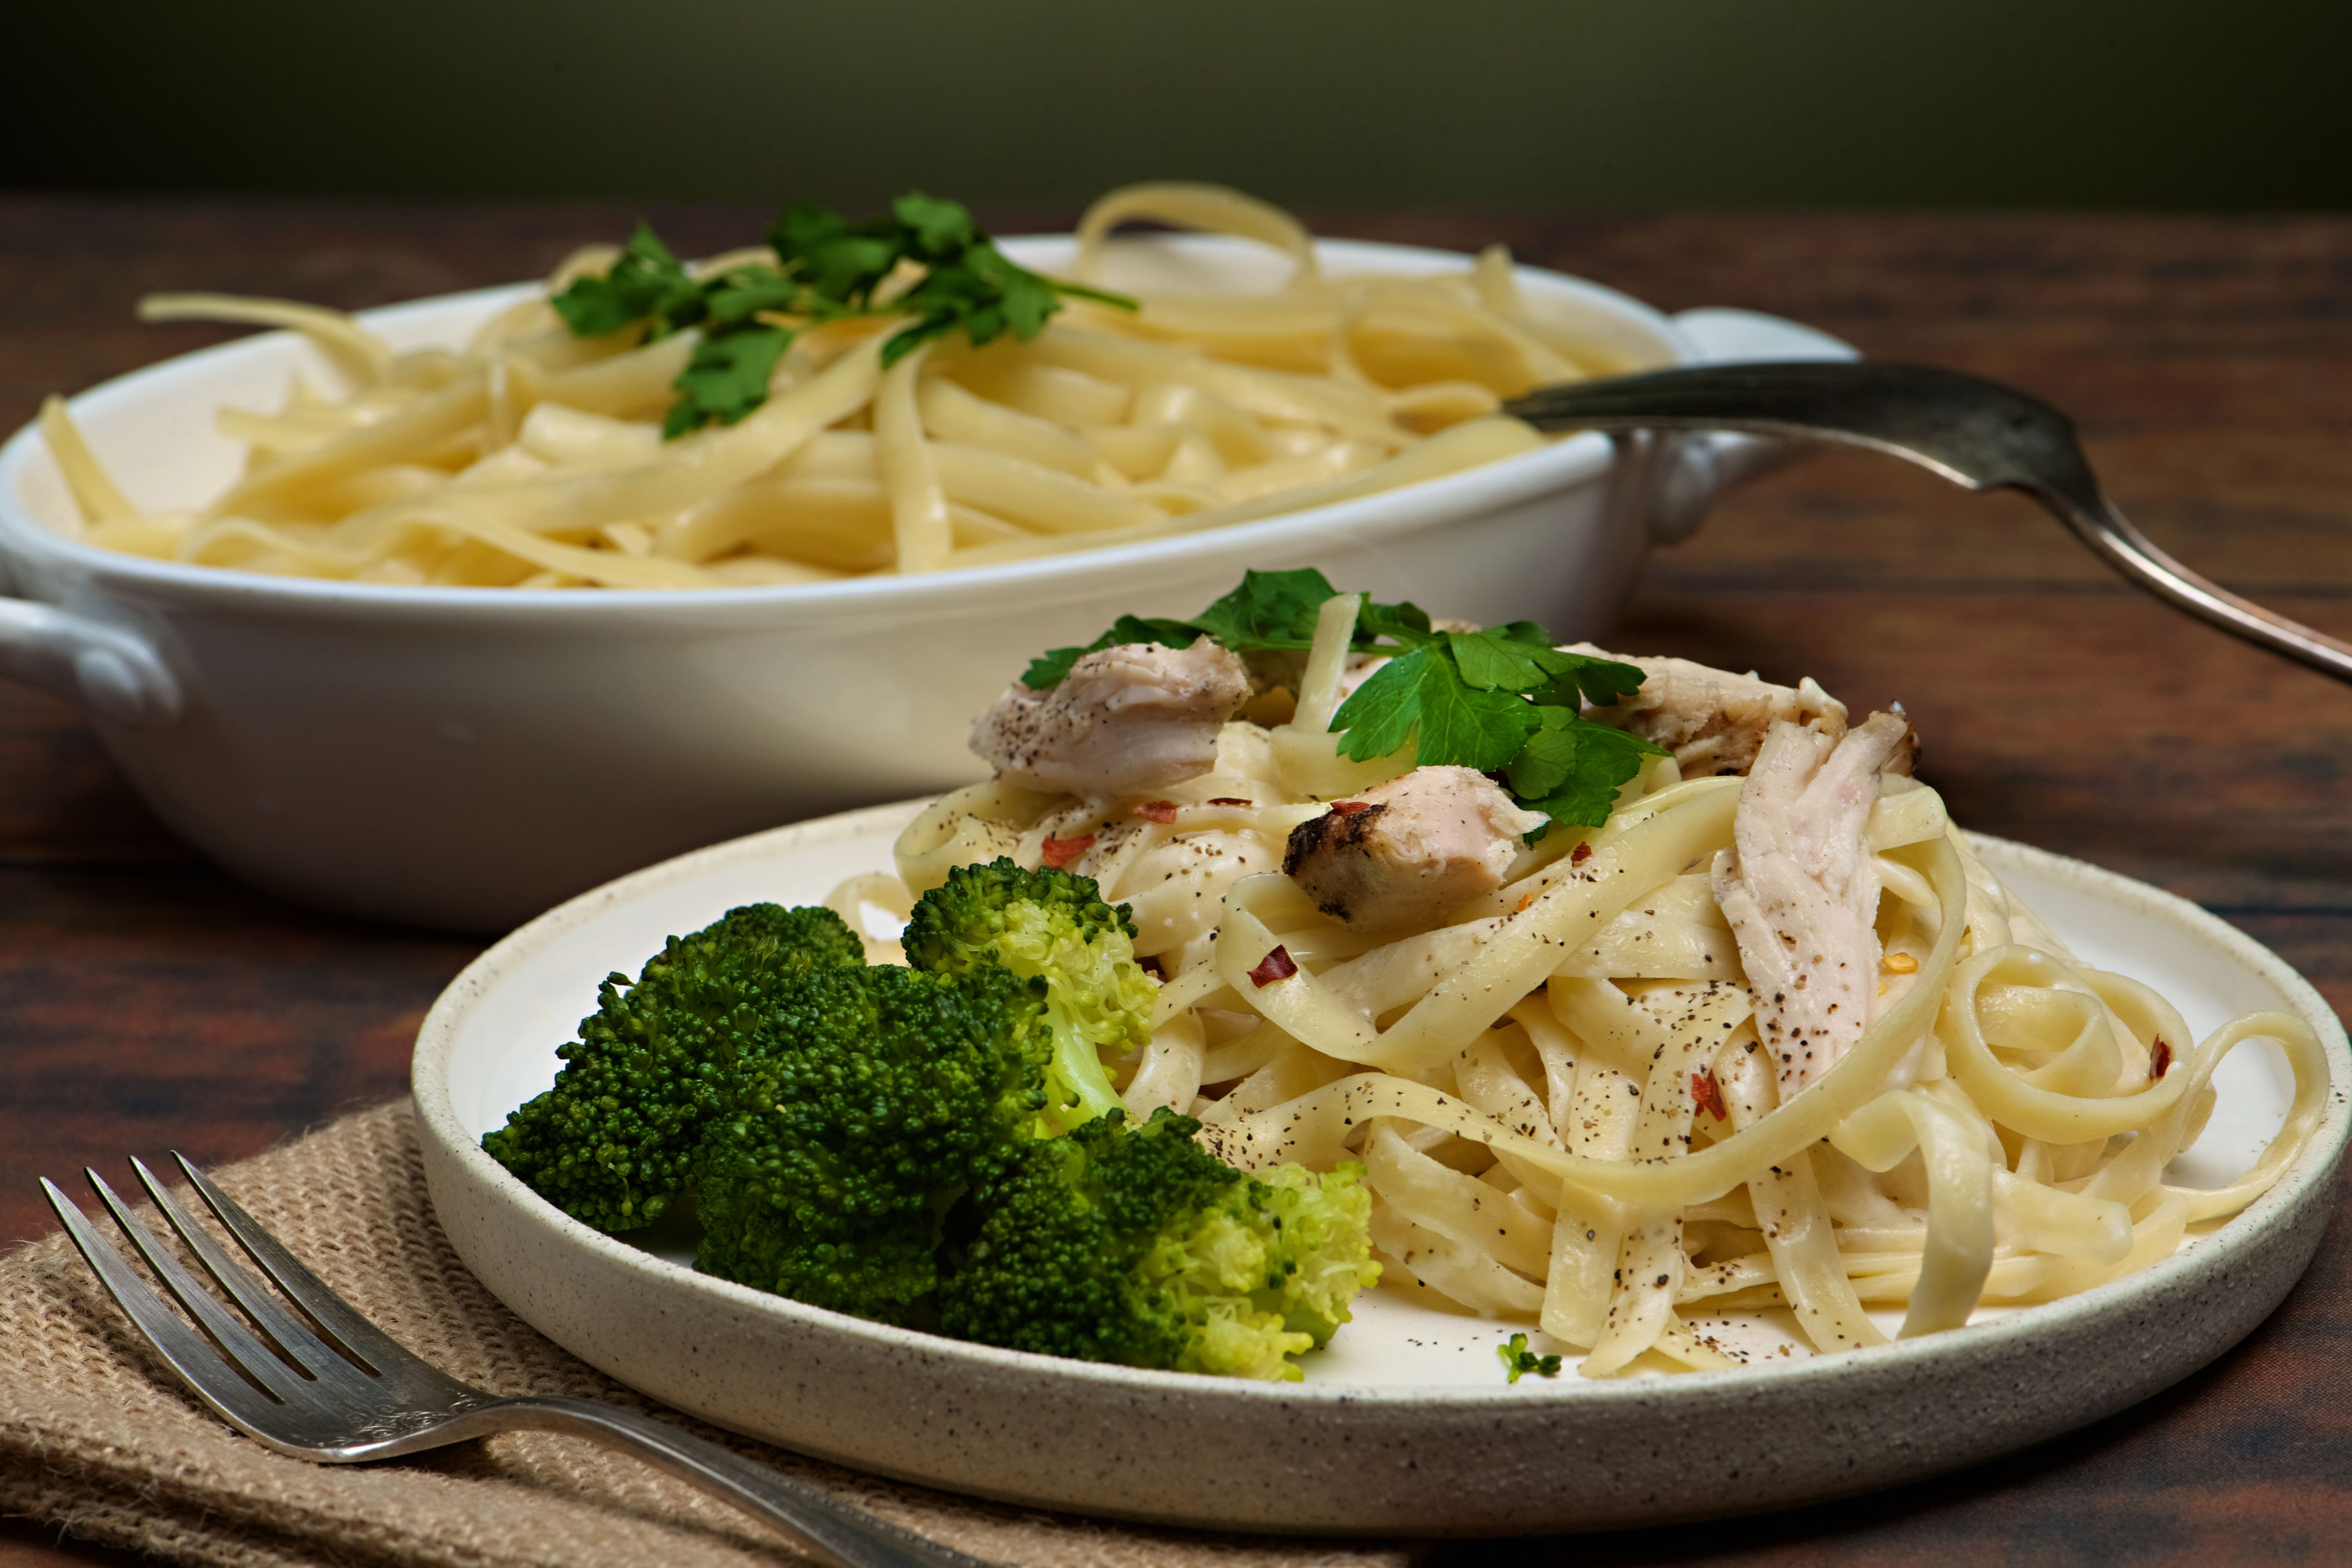 Creamy feffuccine with broccoli and chicken